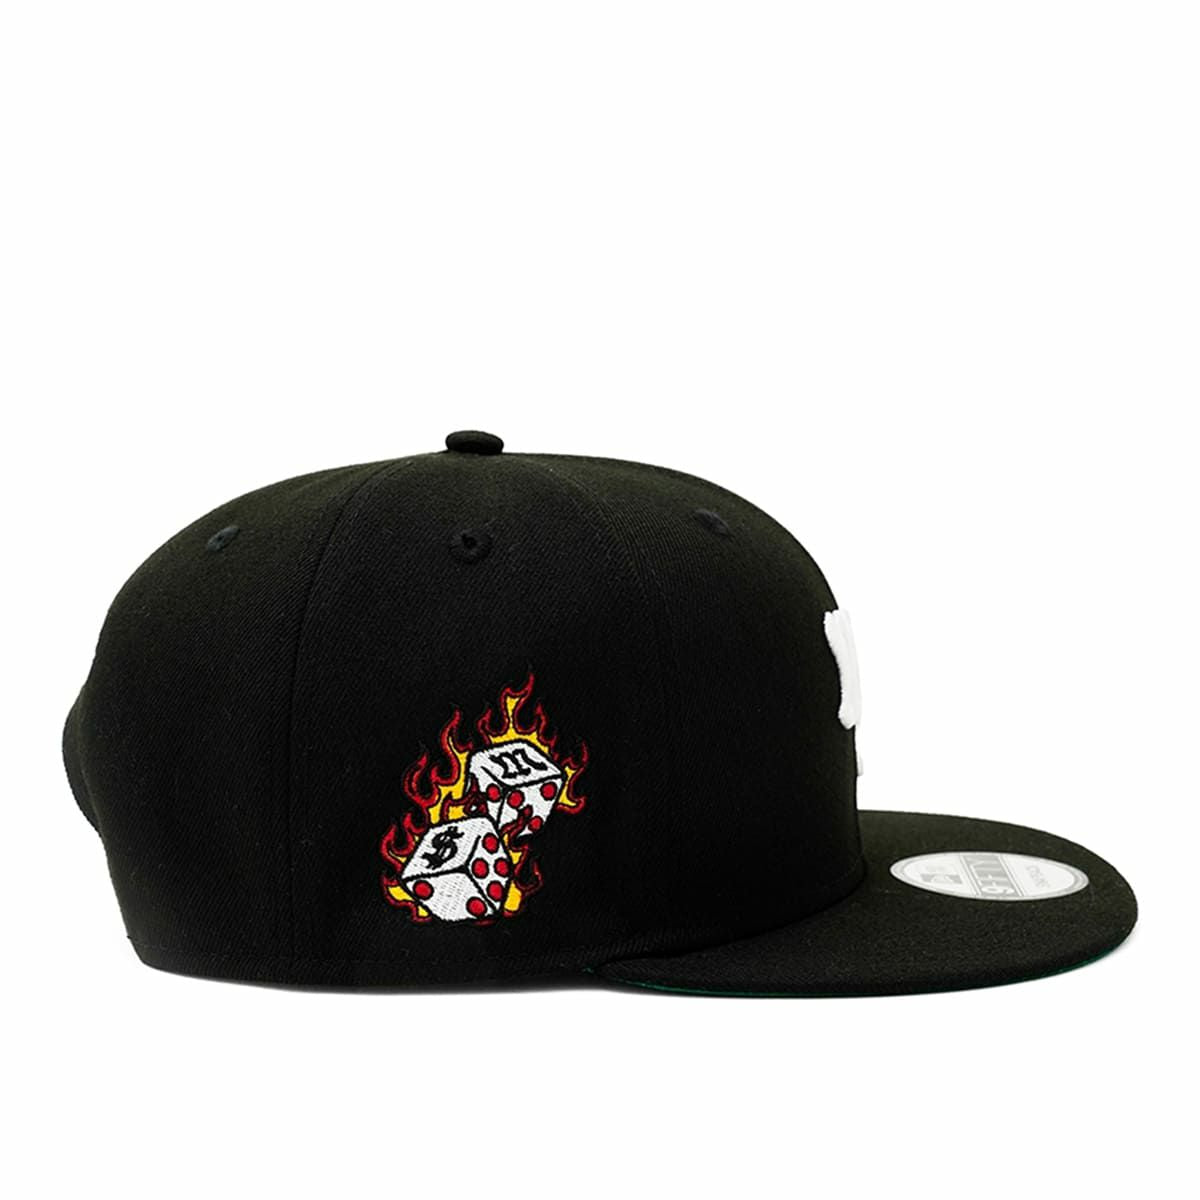 NEW ERA × MFC STORE SNAPBACK M＄ DICE FRAME 9FIFTY【13357973】